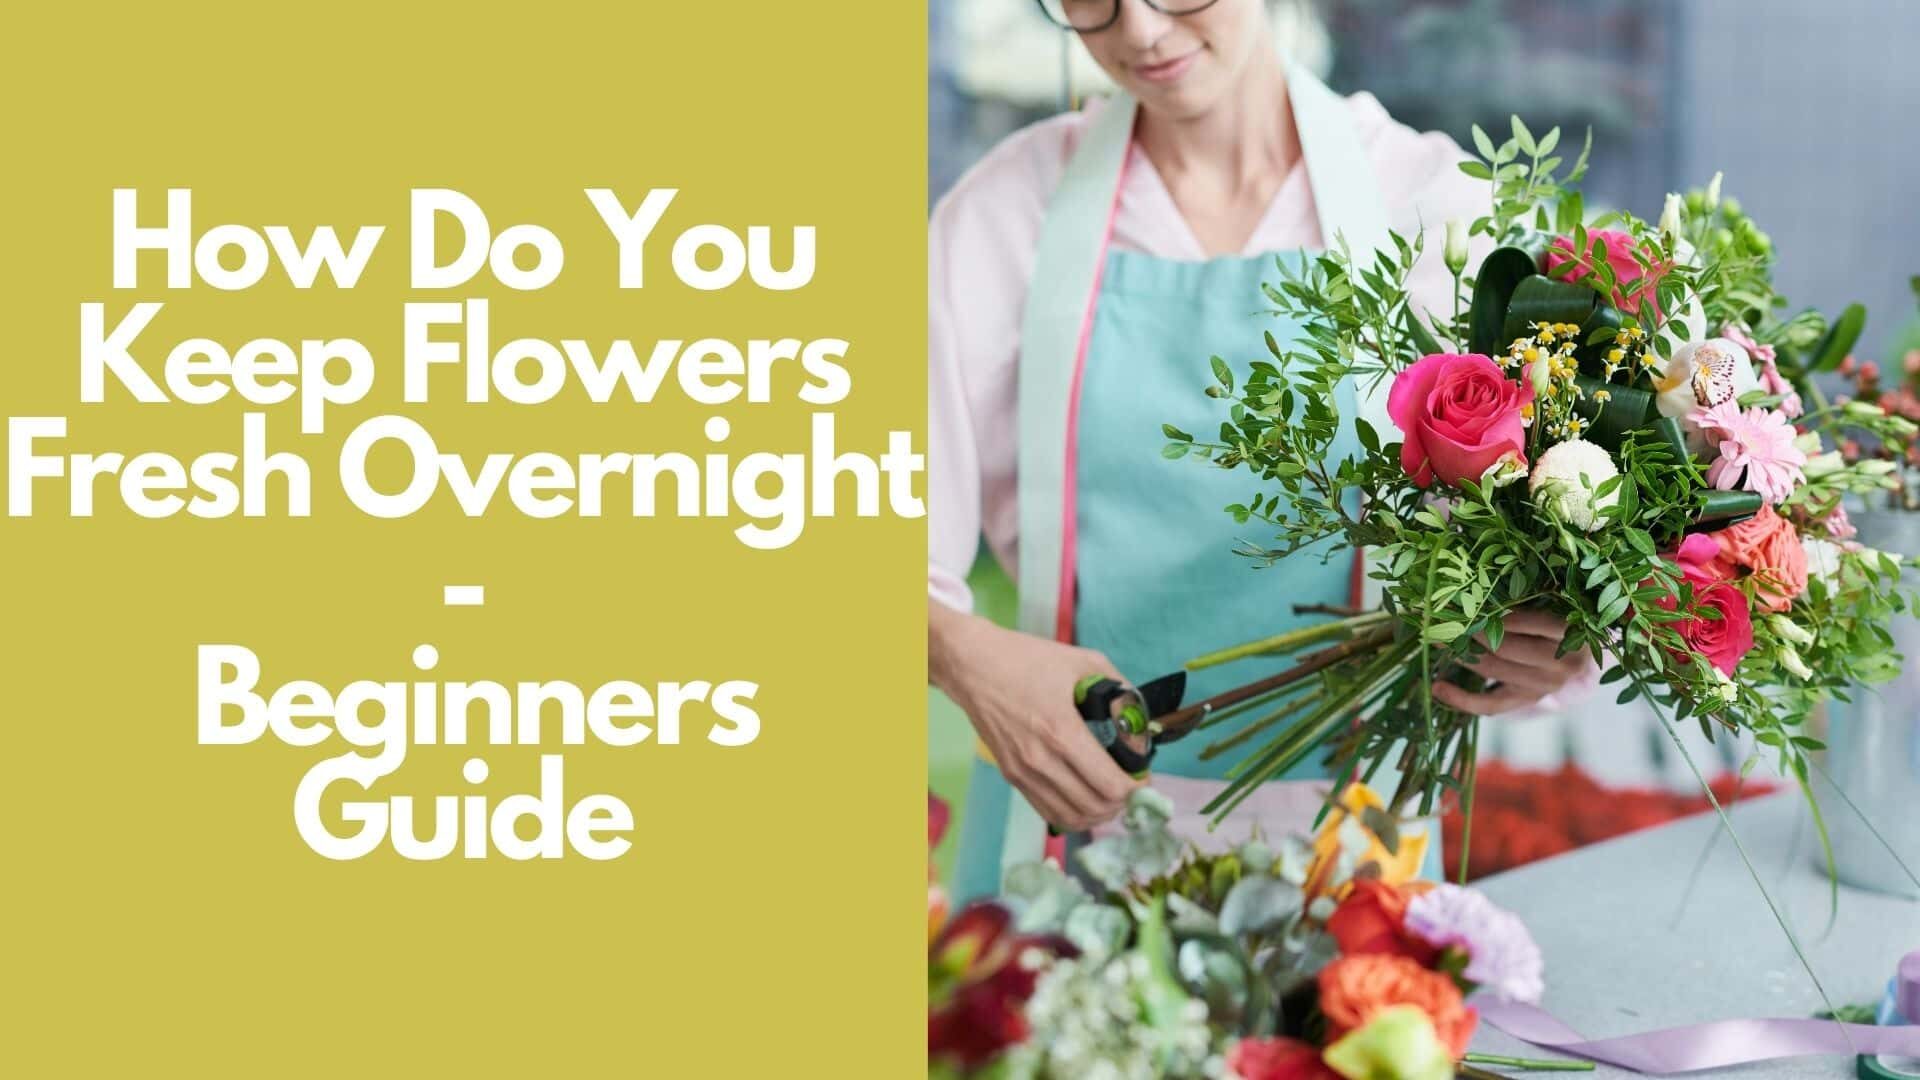 How Do You Keep Flowers Fresh Overnight: Beginners Guide 